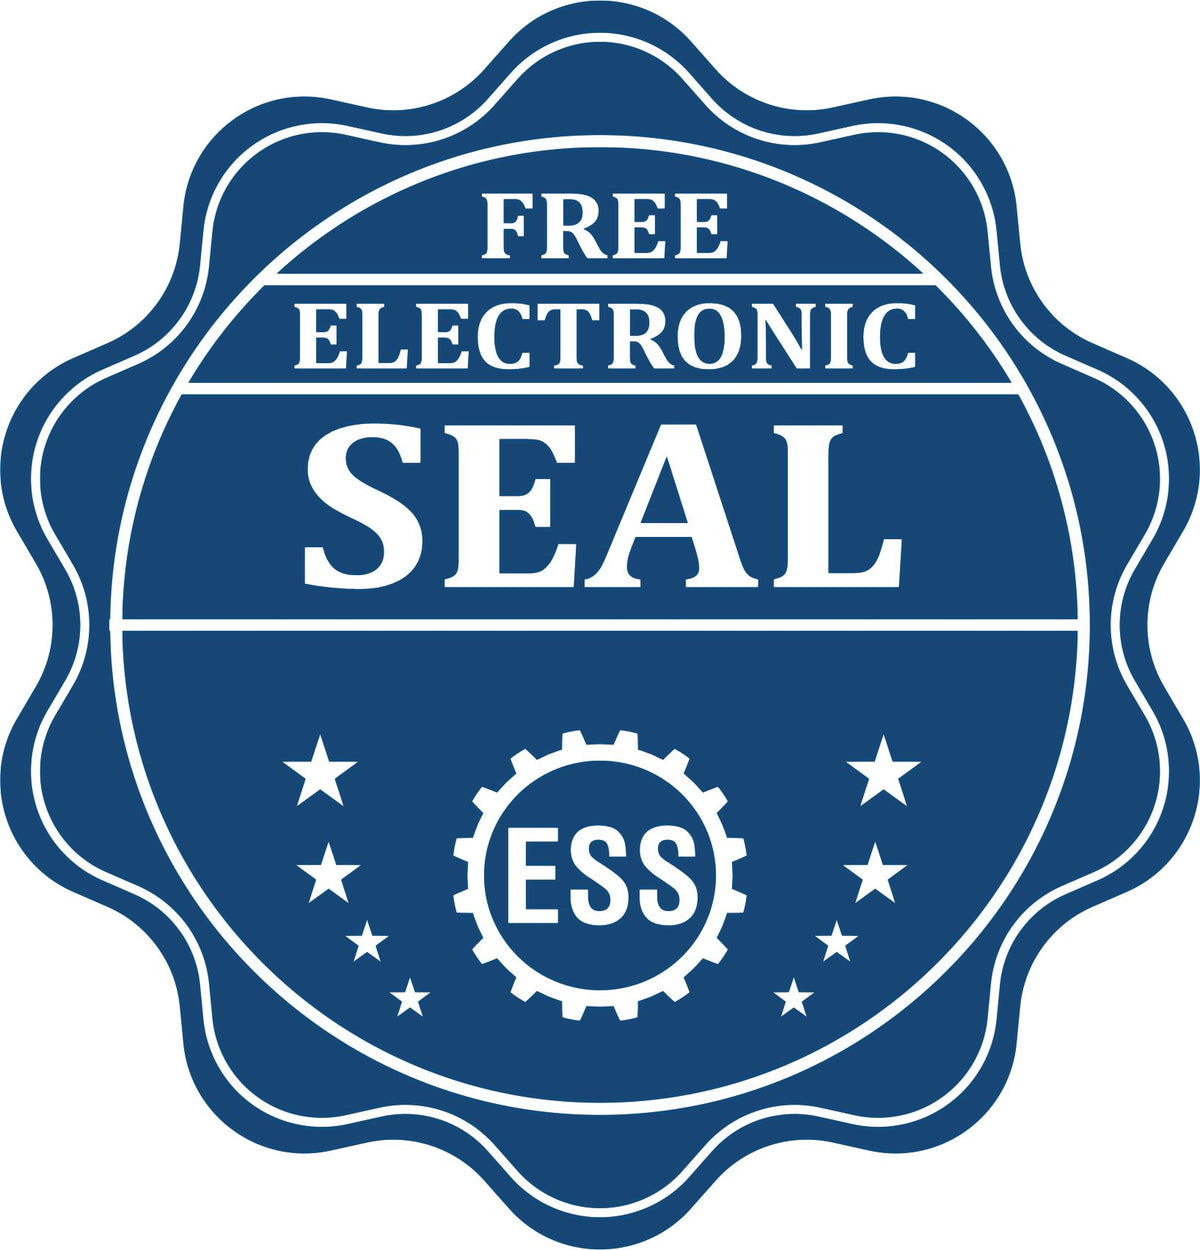 A badge showing a free electronic seal for the Maine Desk Architect Embossing Seal with stars and the ESS gear on the emblem.